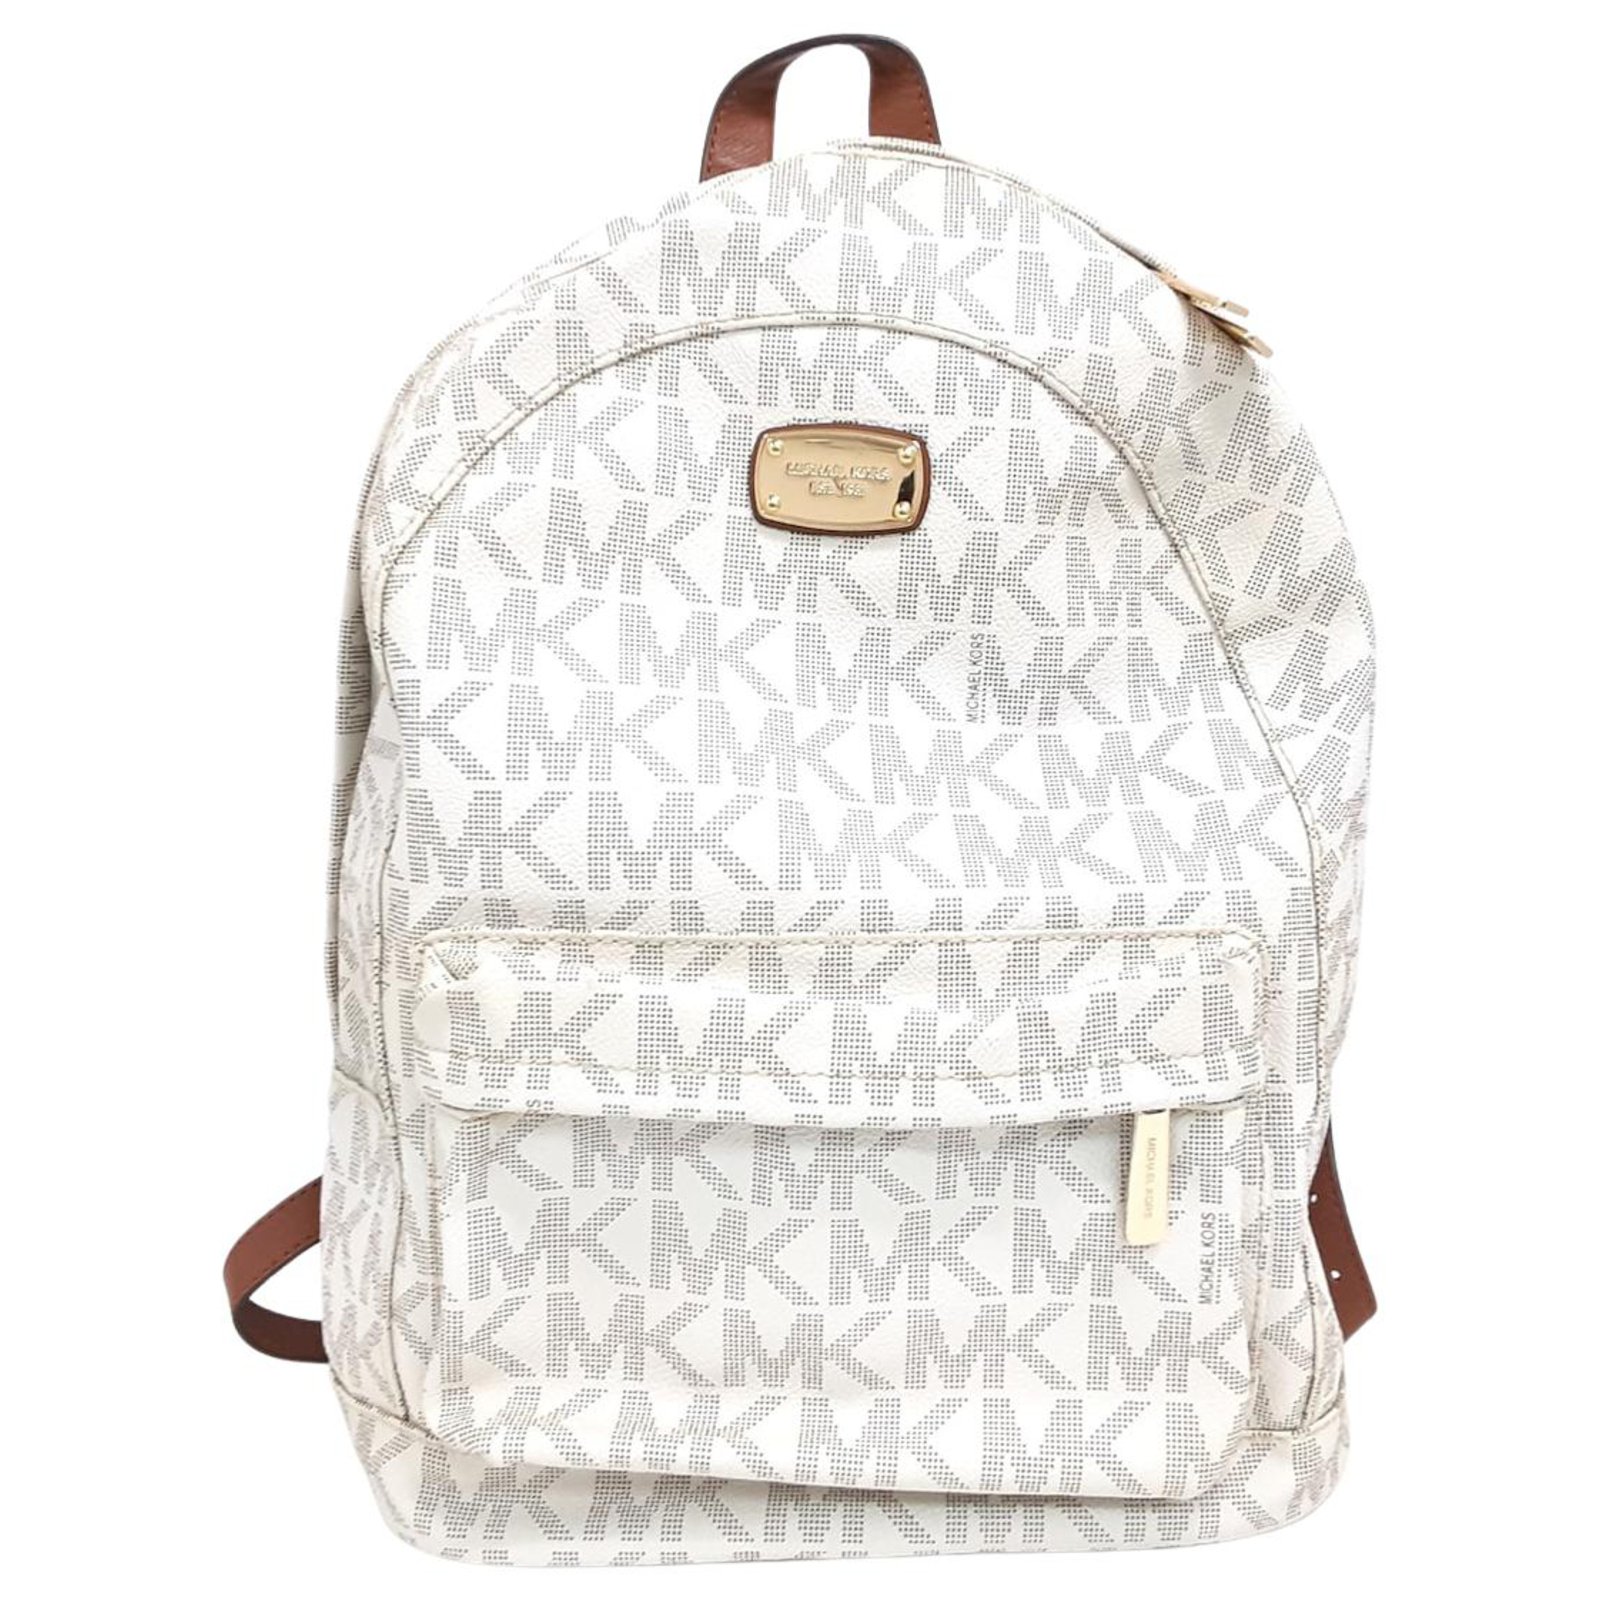 Michael Kors Backpack Men White - $229 (58% Off Retail) New With Tags -  From Sarah